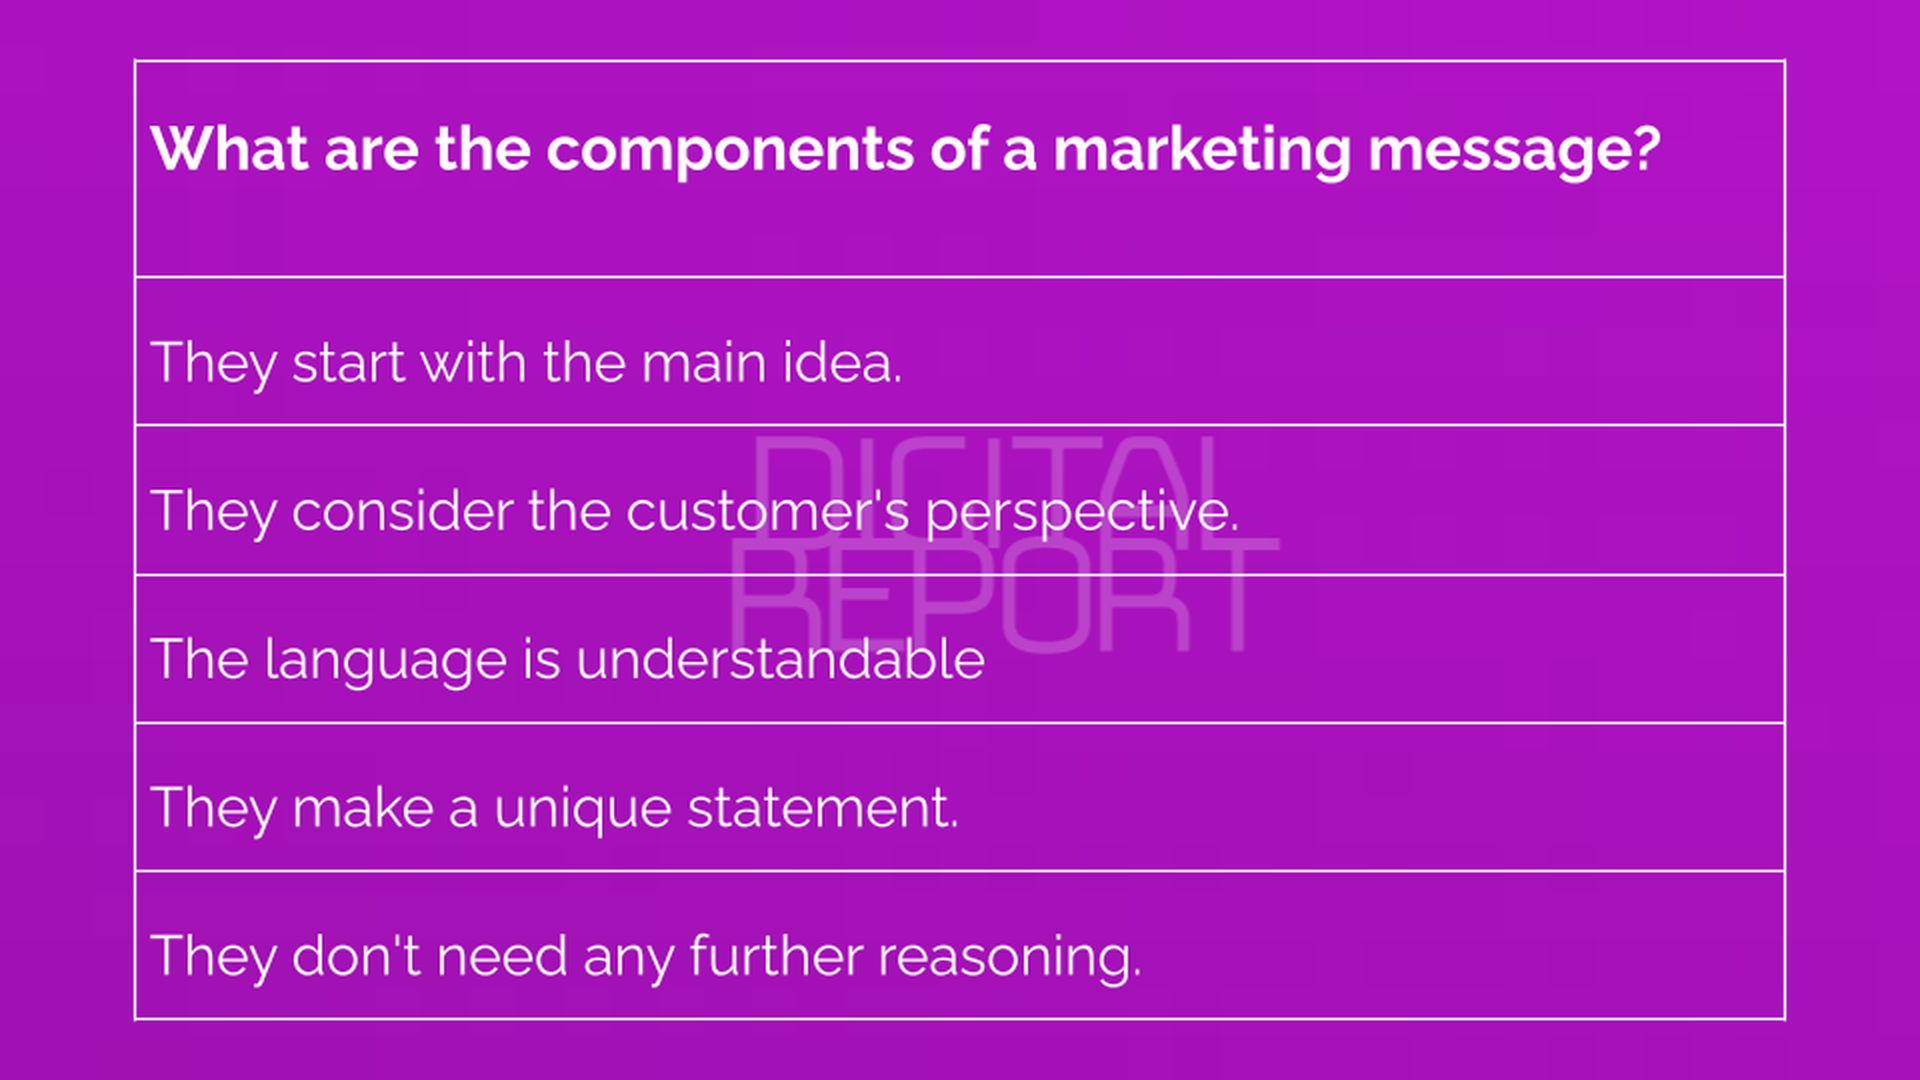 Today we are going to discuss every aspect of a good marketing message, learn what is a key marketing message together. How many types of marketing messages do you know? Can you name any marketing message examples to attract customers? Let’s get going!